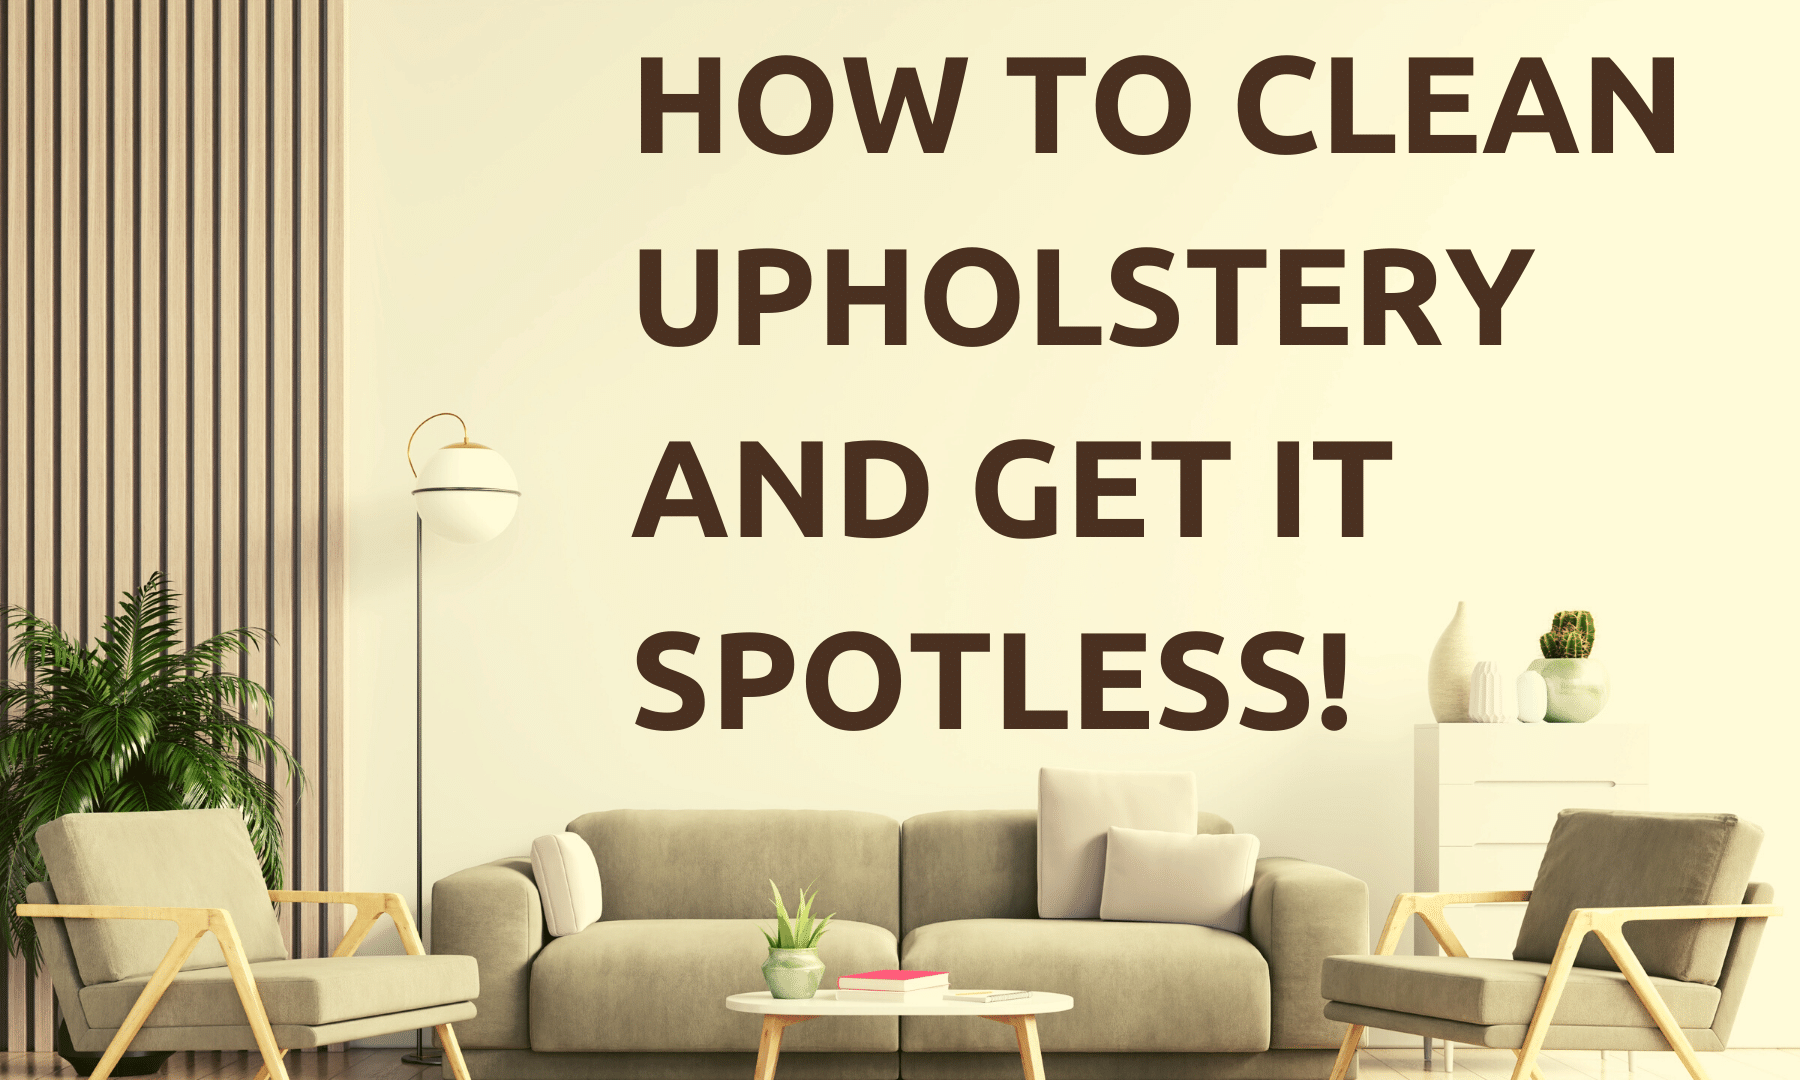 A white and gray-themed living room containing a light gray sofa, two gray chairs, a white dresser, and a white coffee table. Text reads: "How To Clean Upholstery And Get It Spotless!"